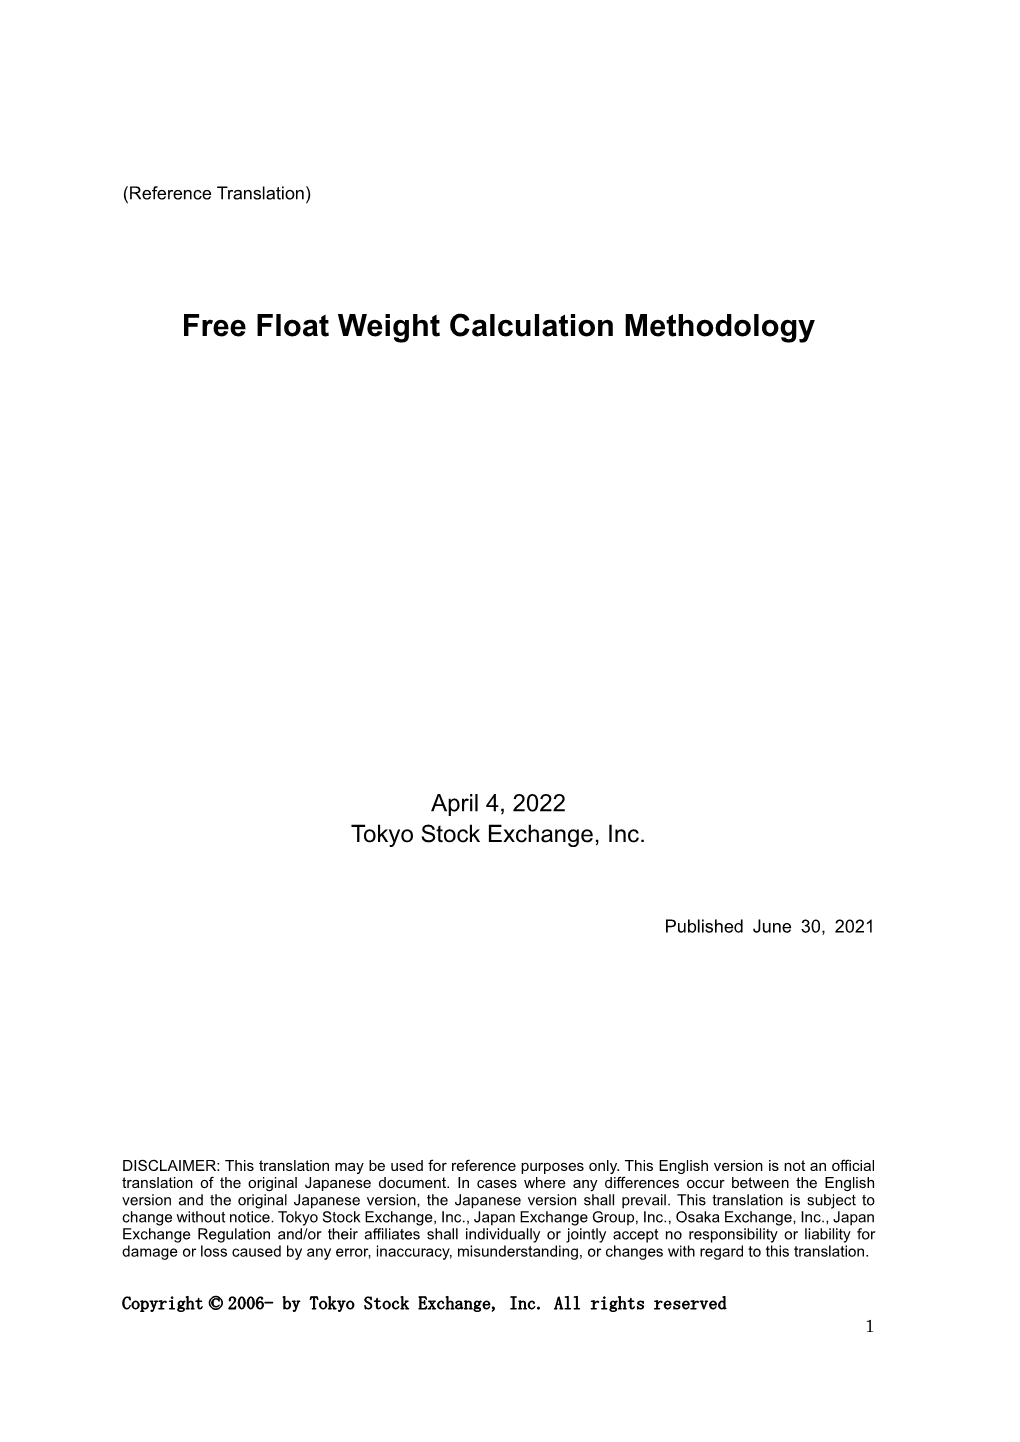 Free Float Weight Calculation Methodology